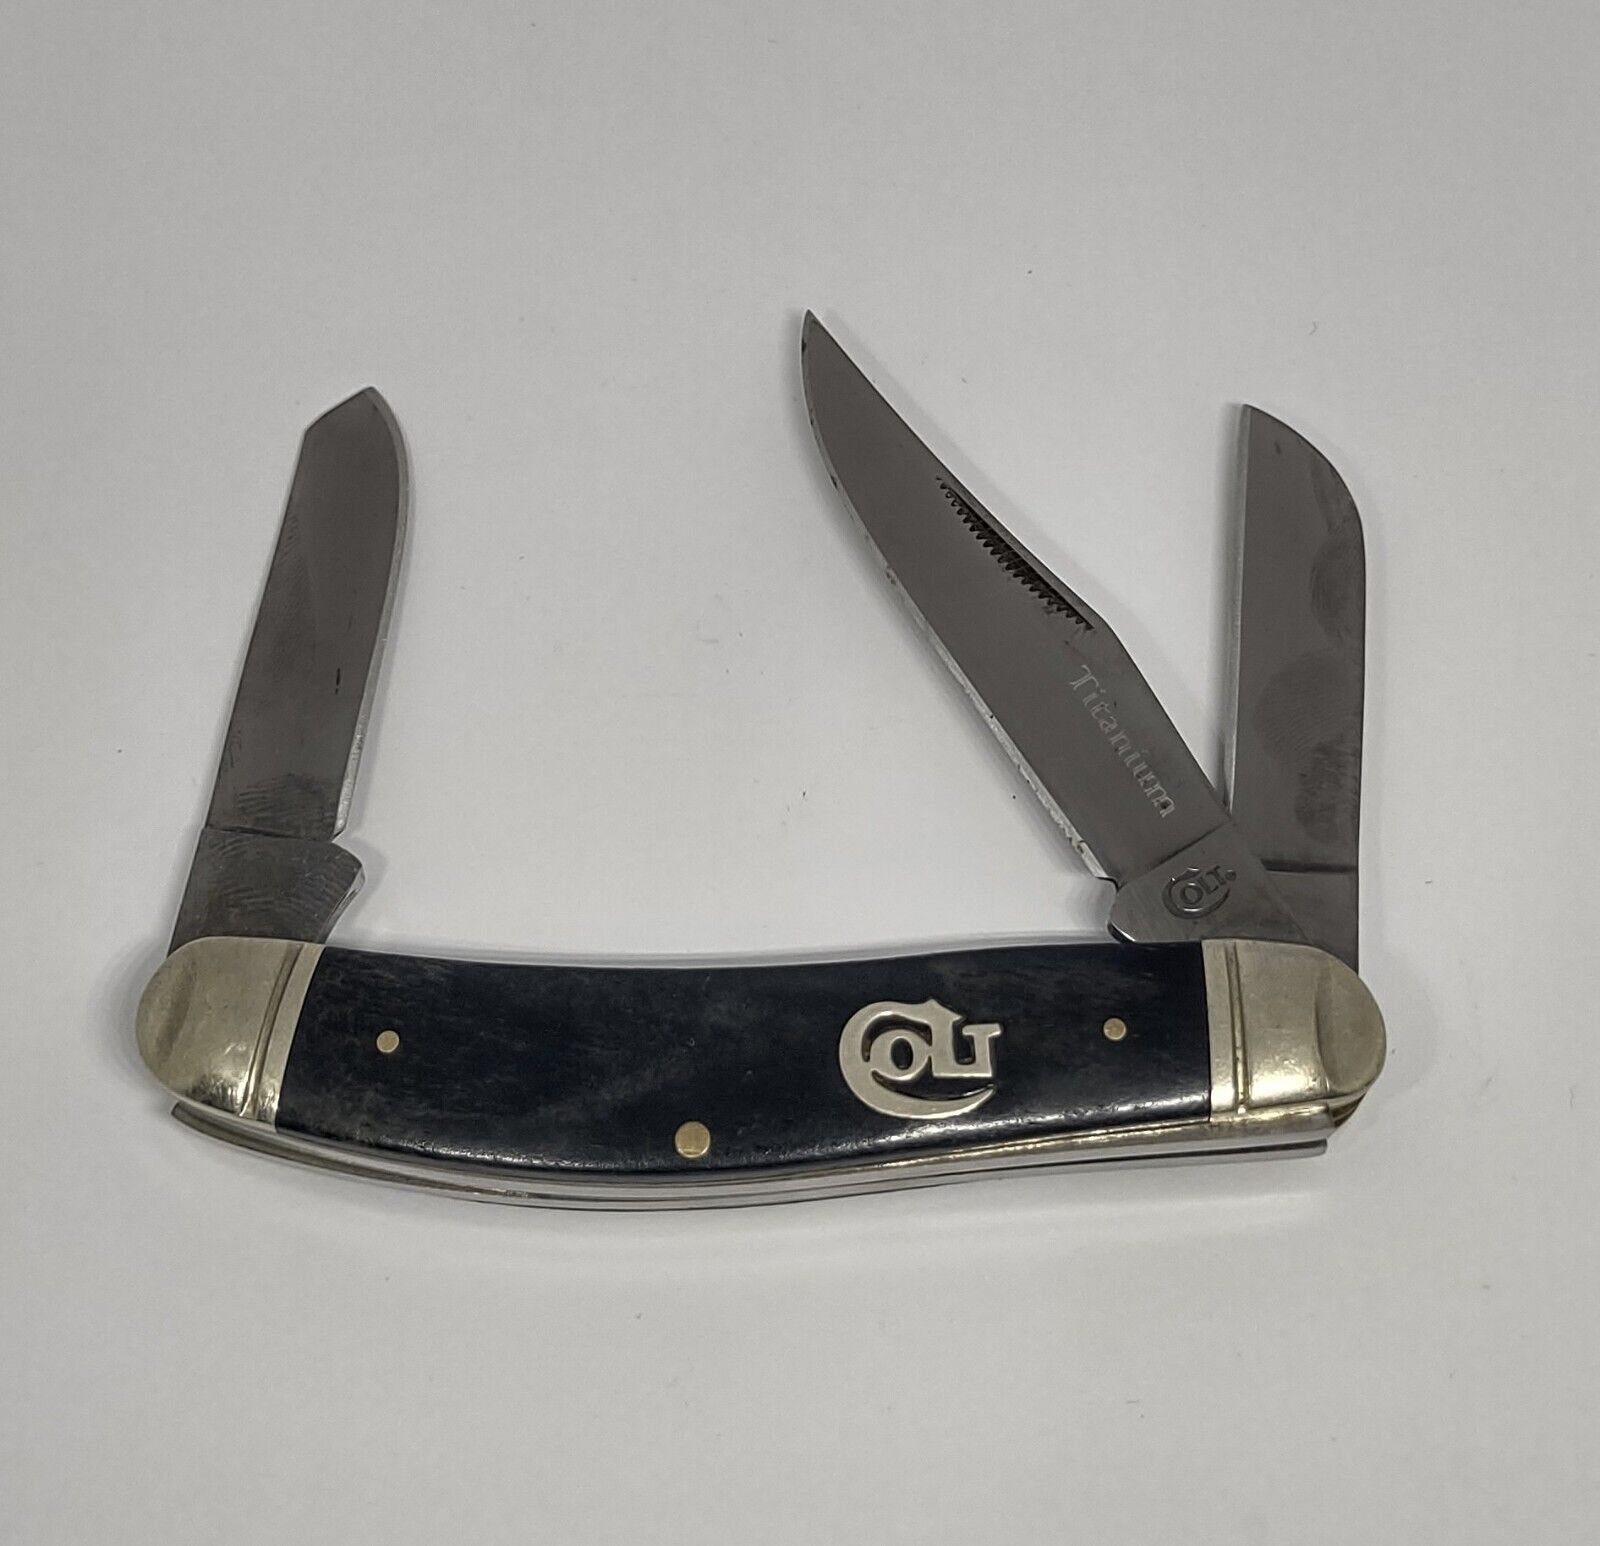 Discontinued Colt CT311 Sowbelly Stockman Knife